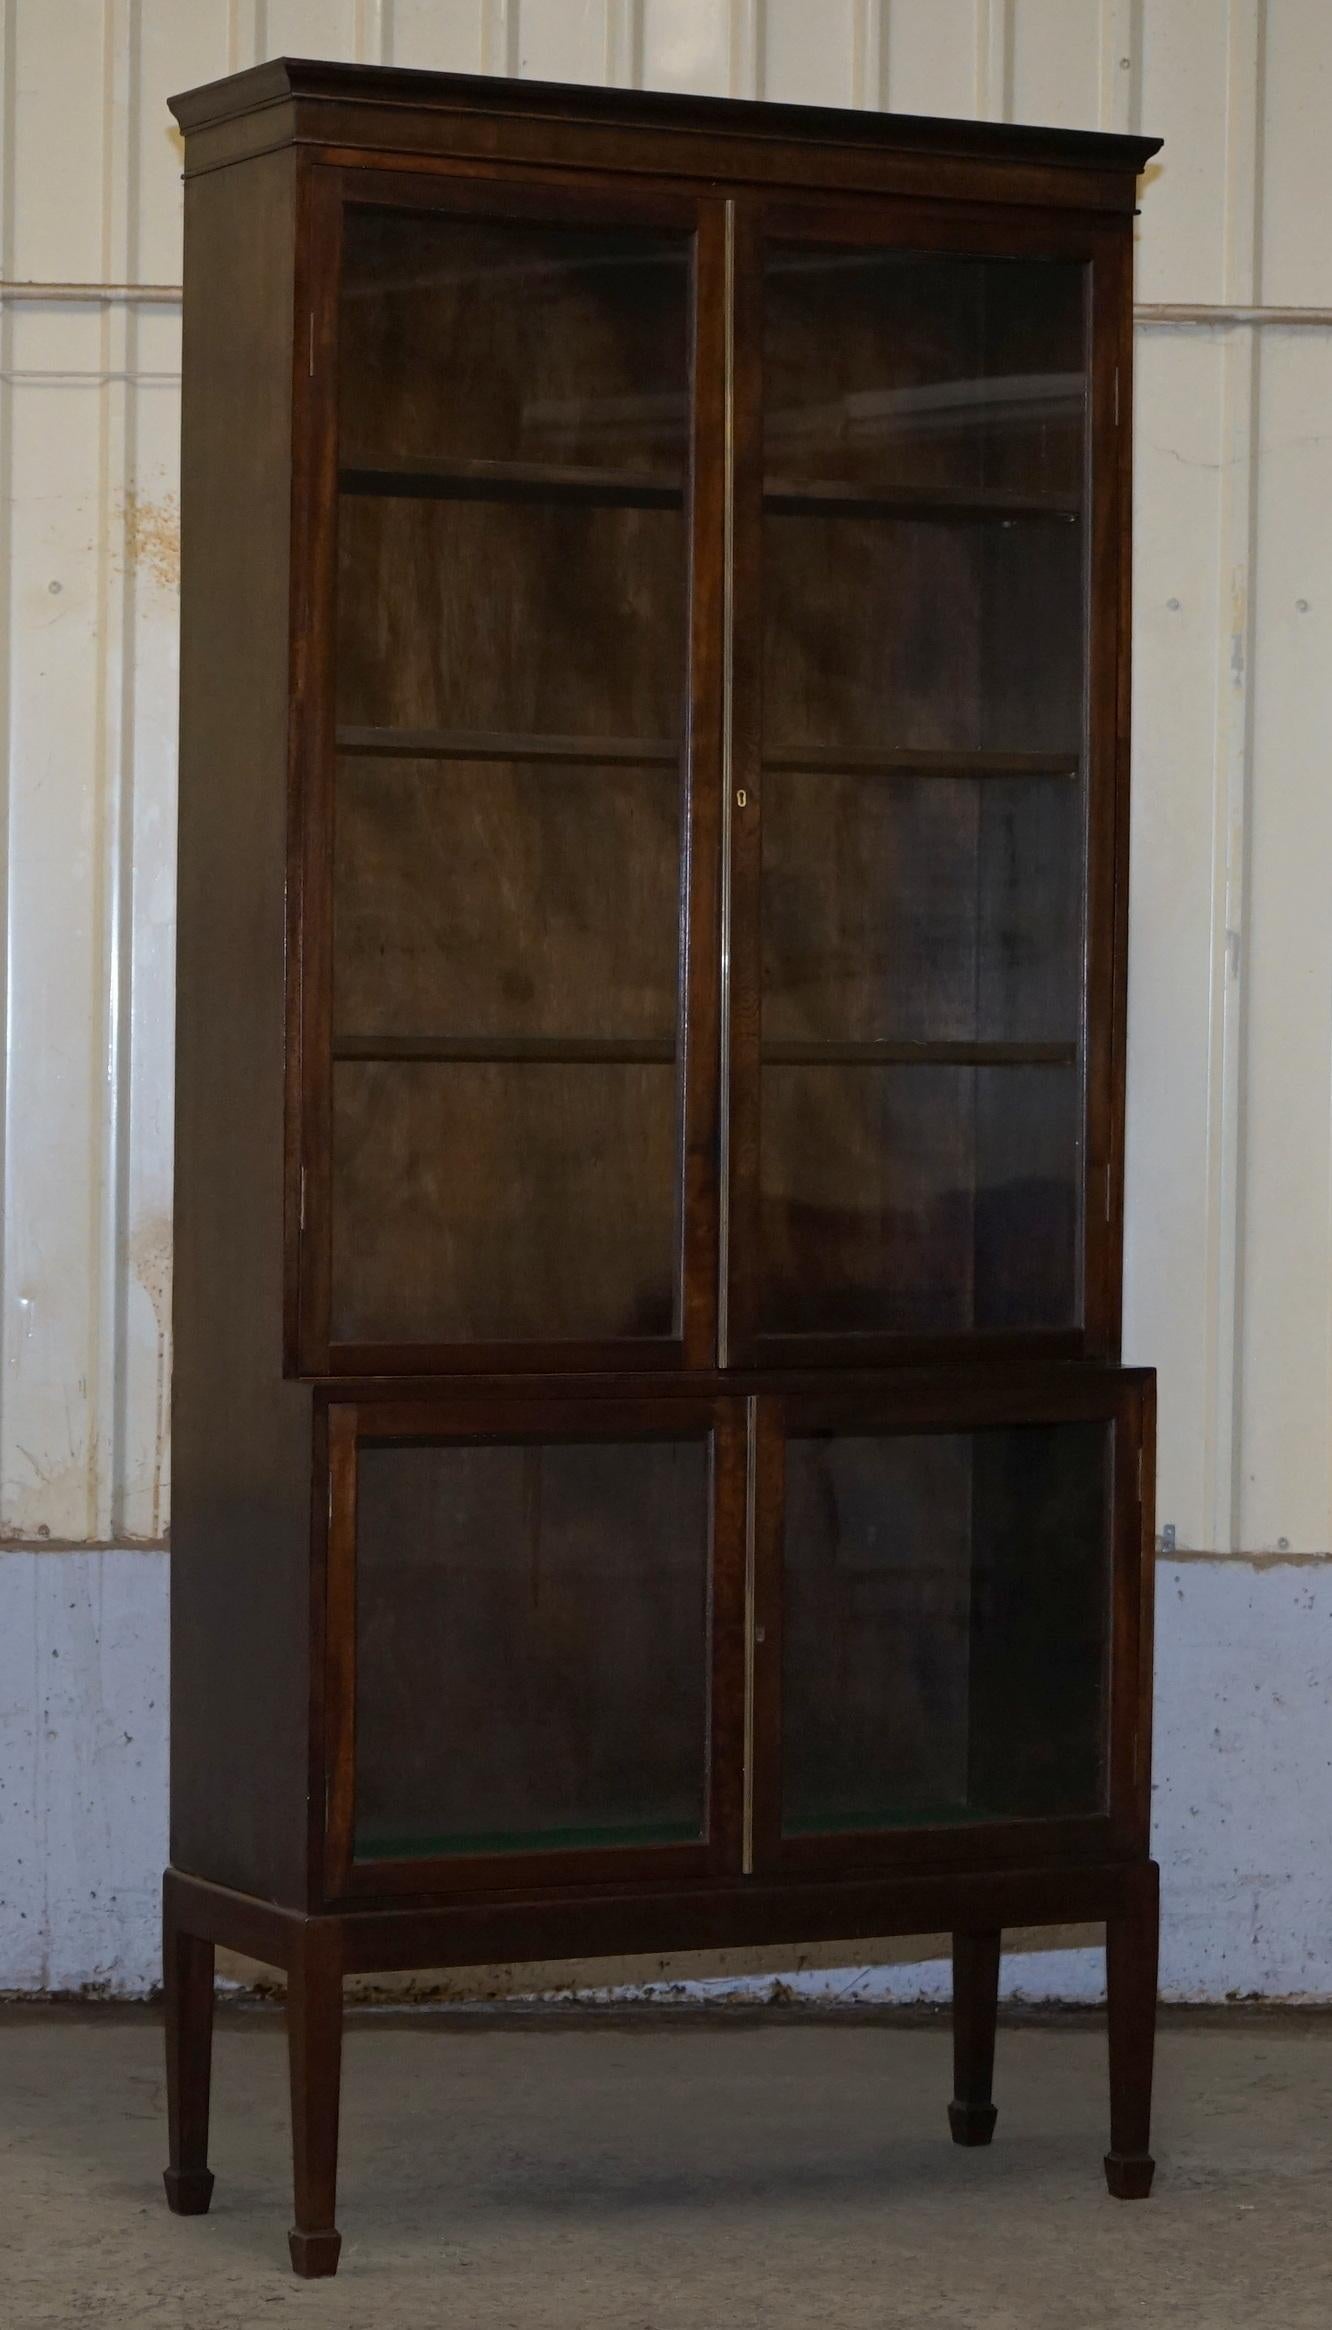 Wimbledon-Furniture

Wimbledon-Furniture is delighted to offer for sale this stunning set of four original Victorian Oxford Library mahogany bookcases

Please note the delivery fee listed is just a guide, it covers within the M25 only, for an